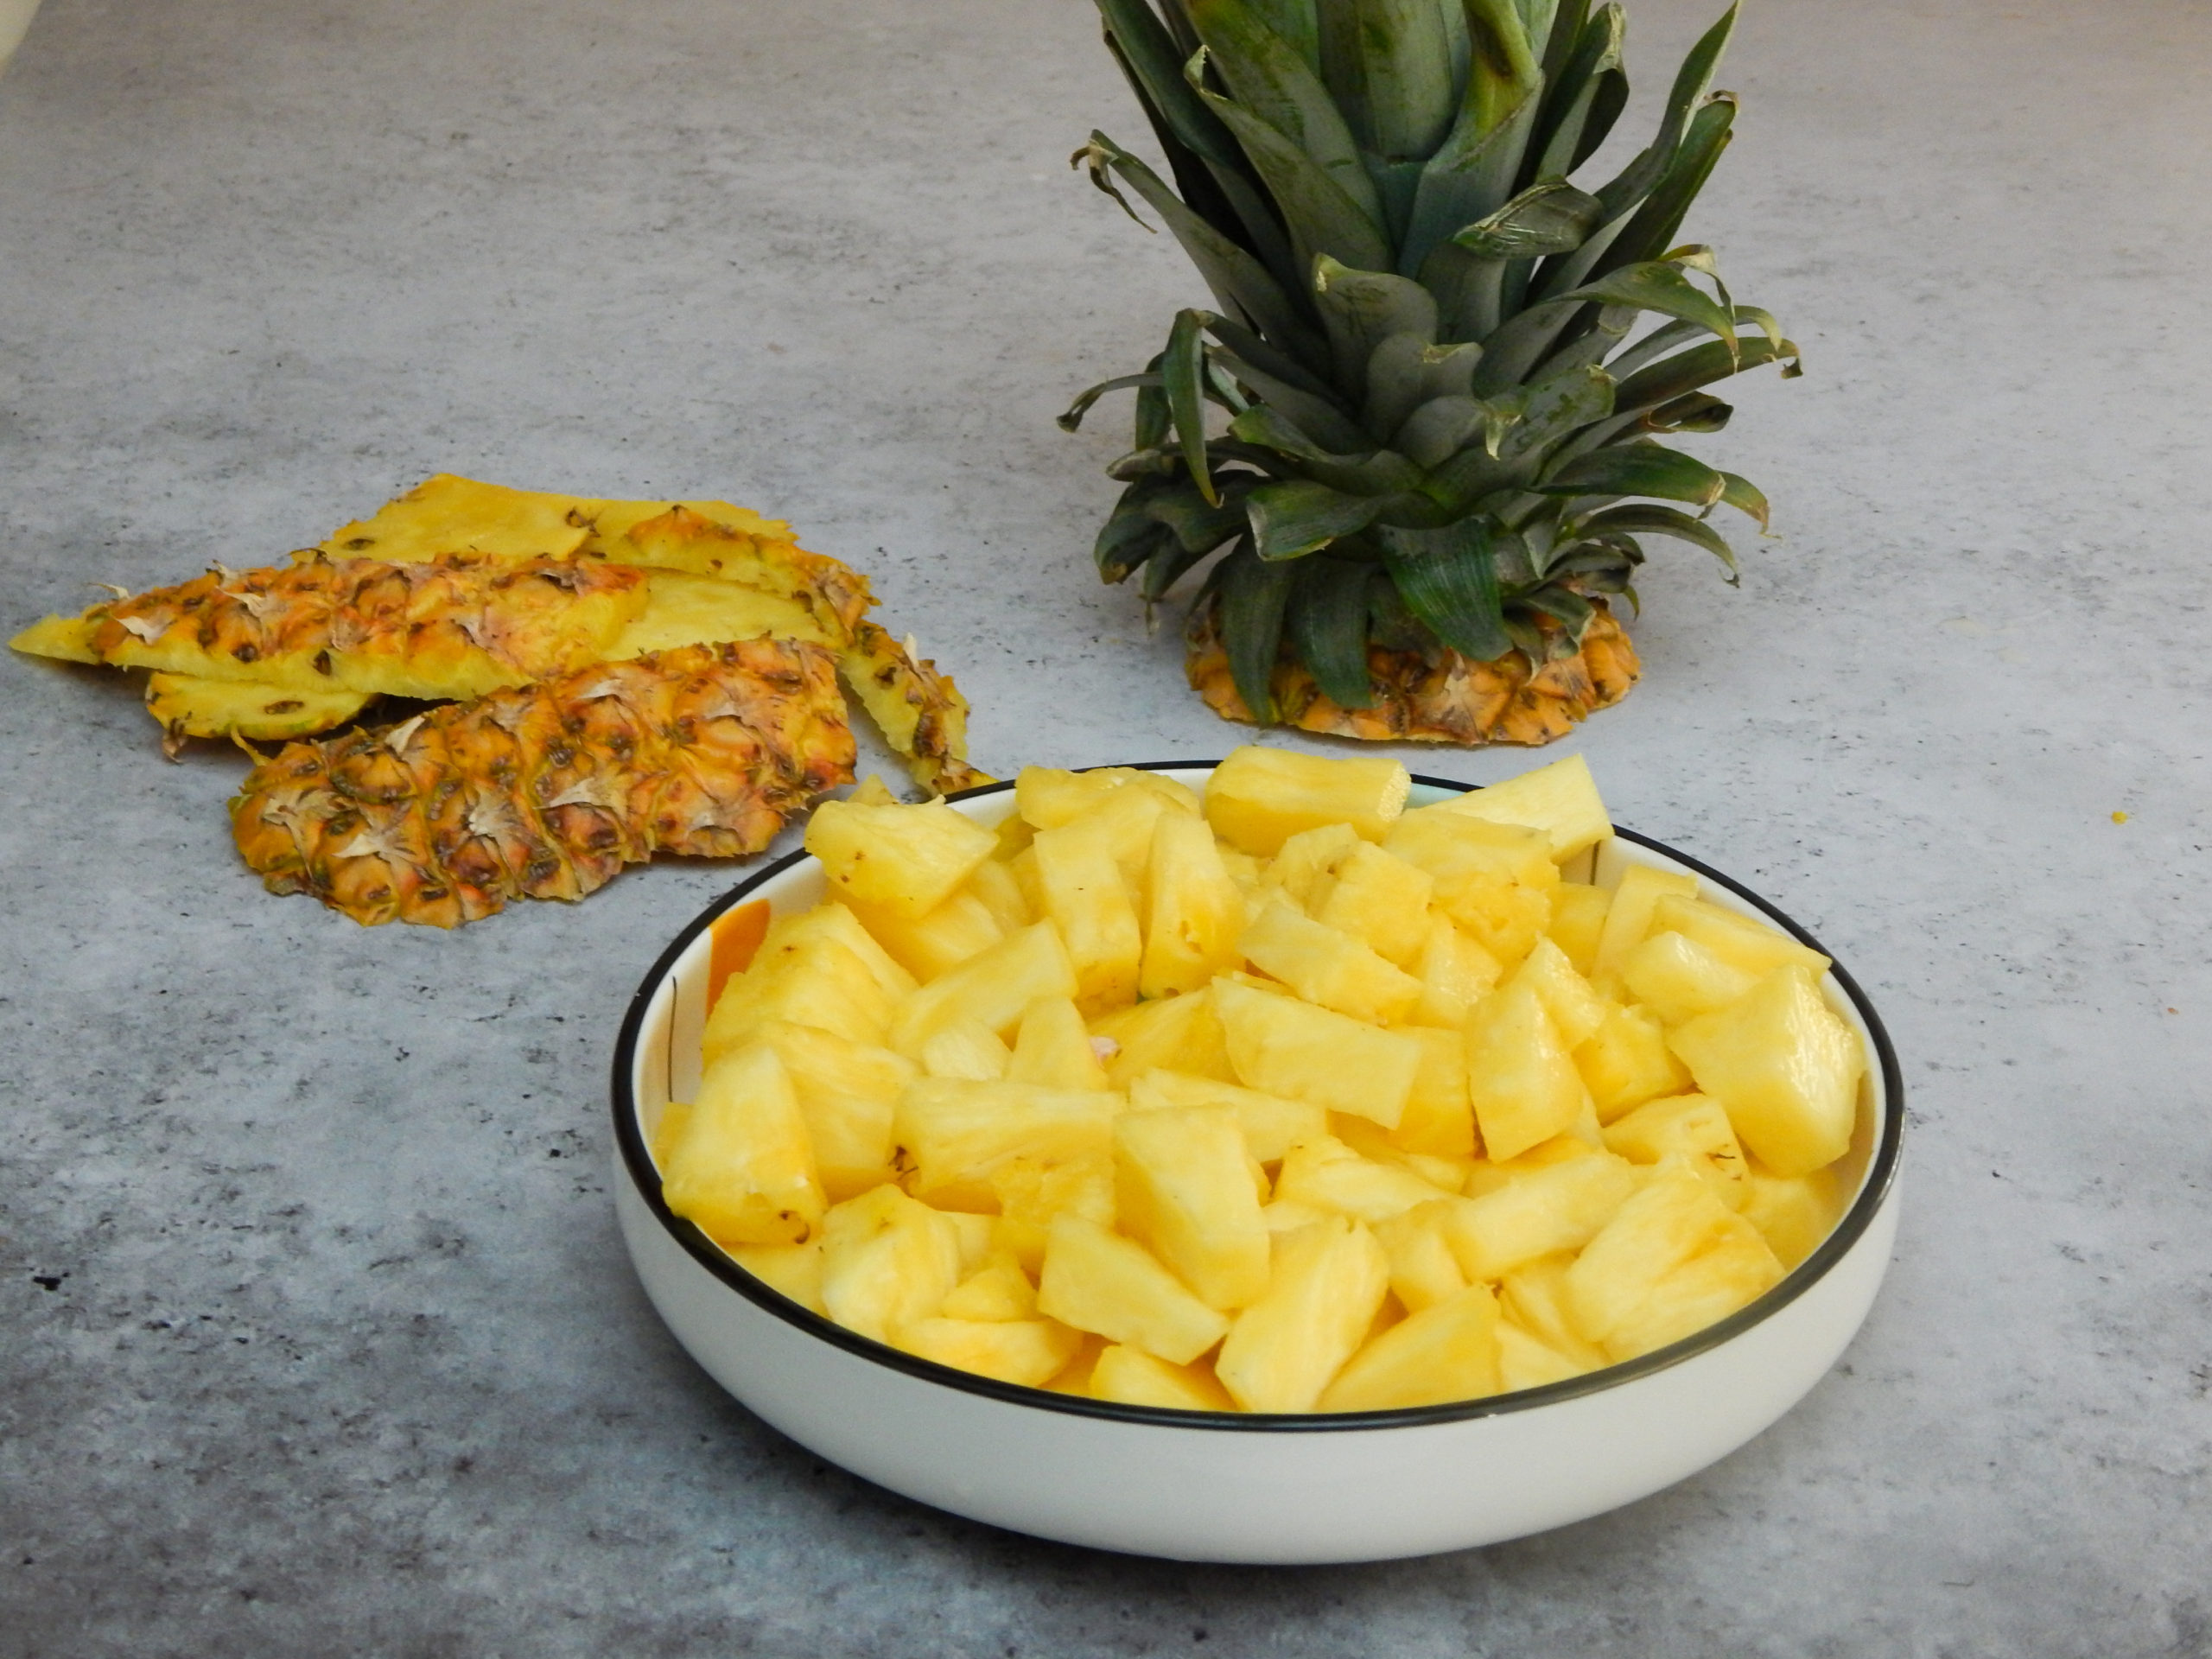 How to peel & cut a pineapple